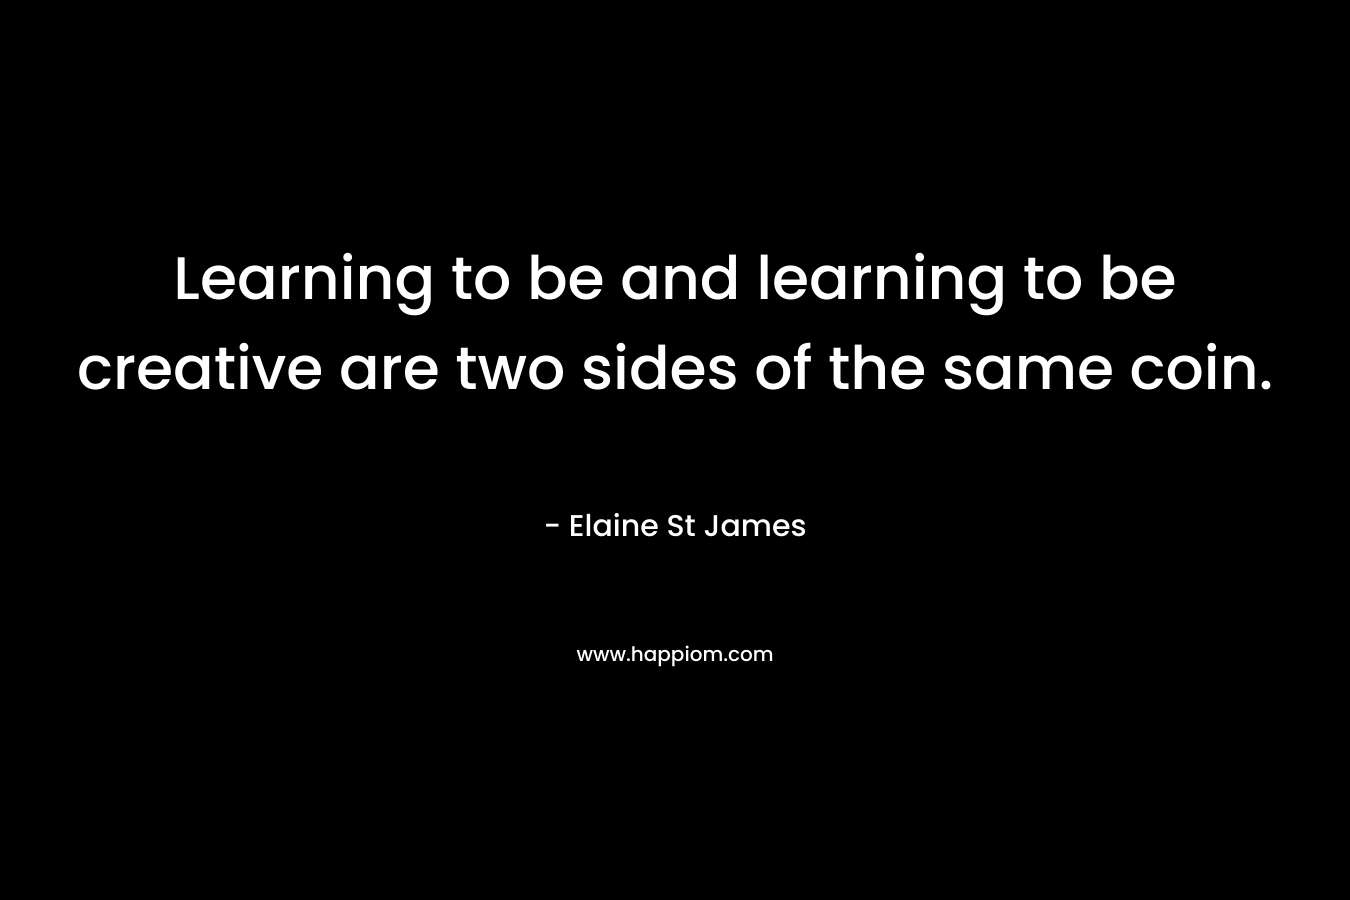 Learning to be and learning to be creative are two sides of the same coin.